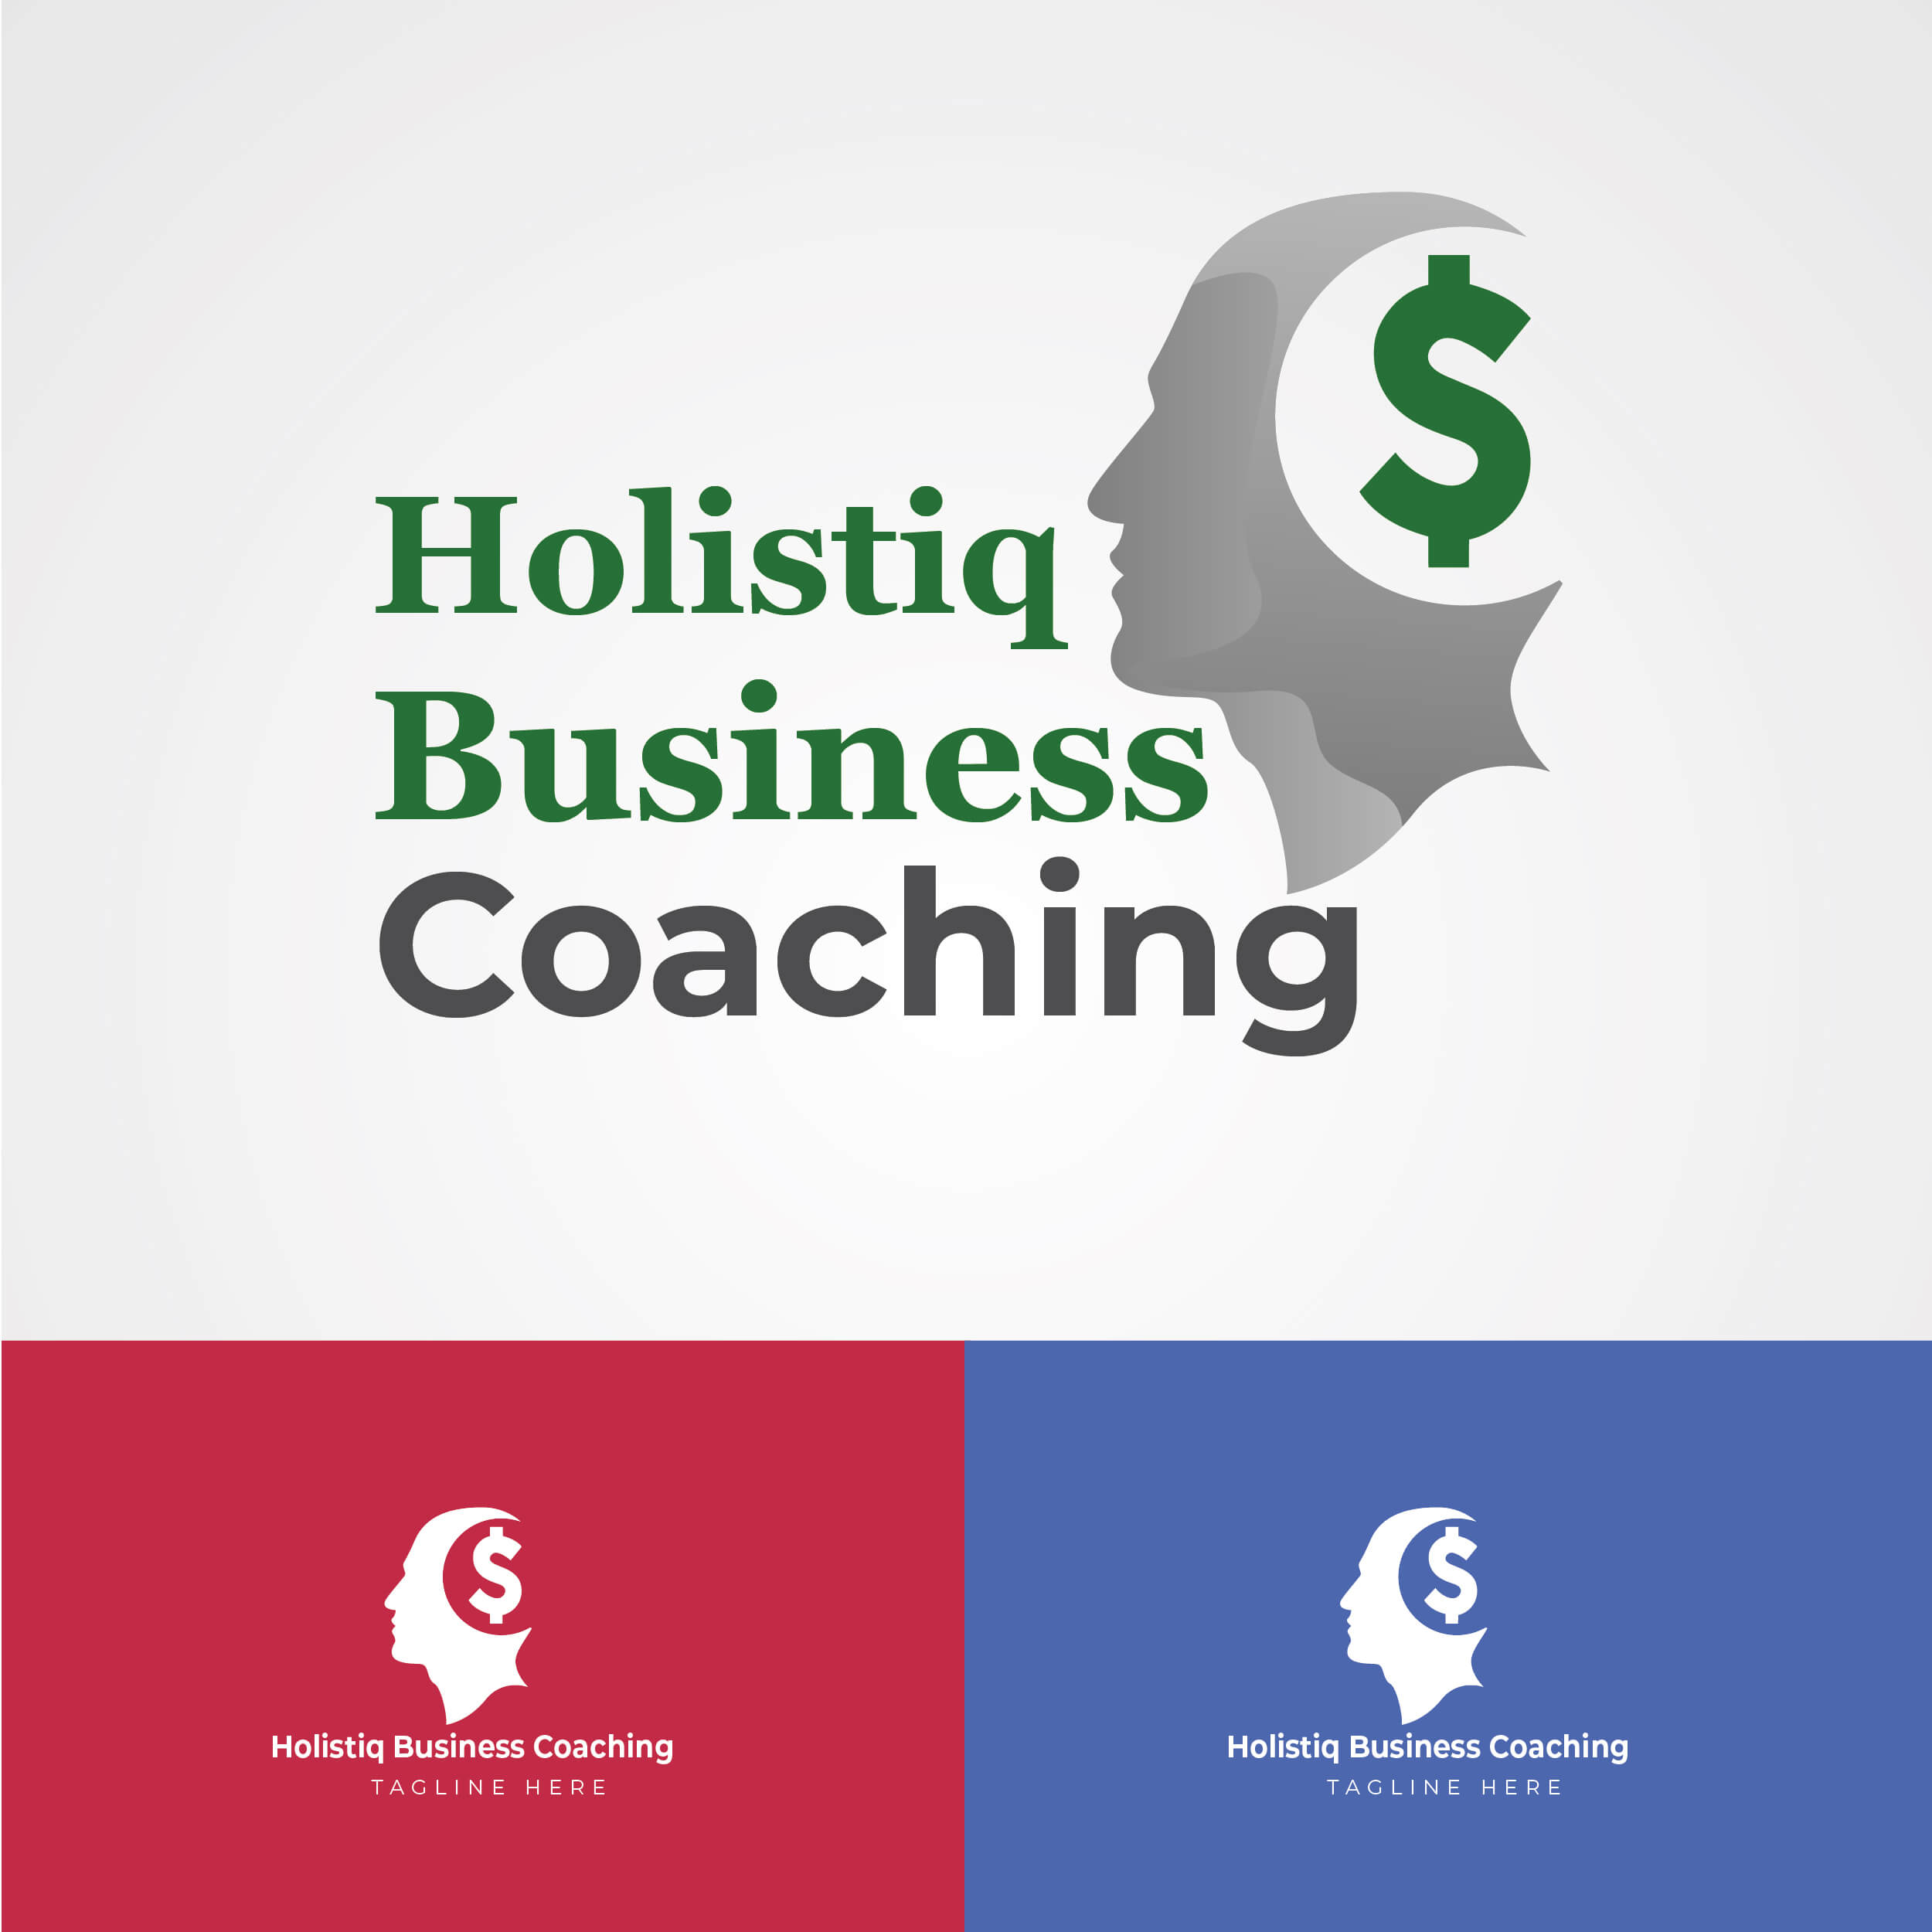 Holistiq Business Coaching preview image.